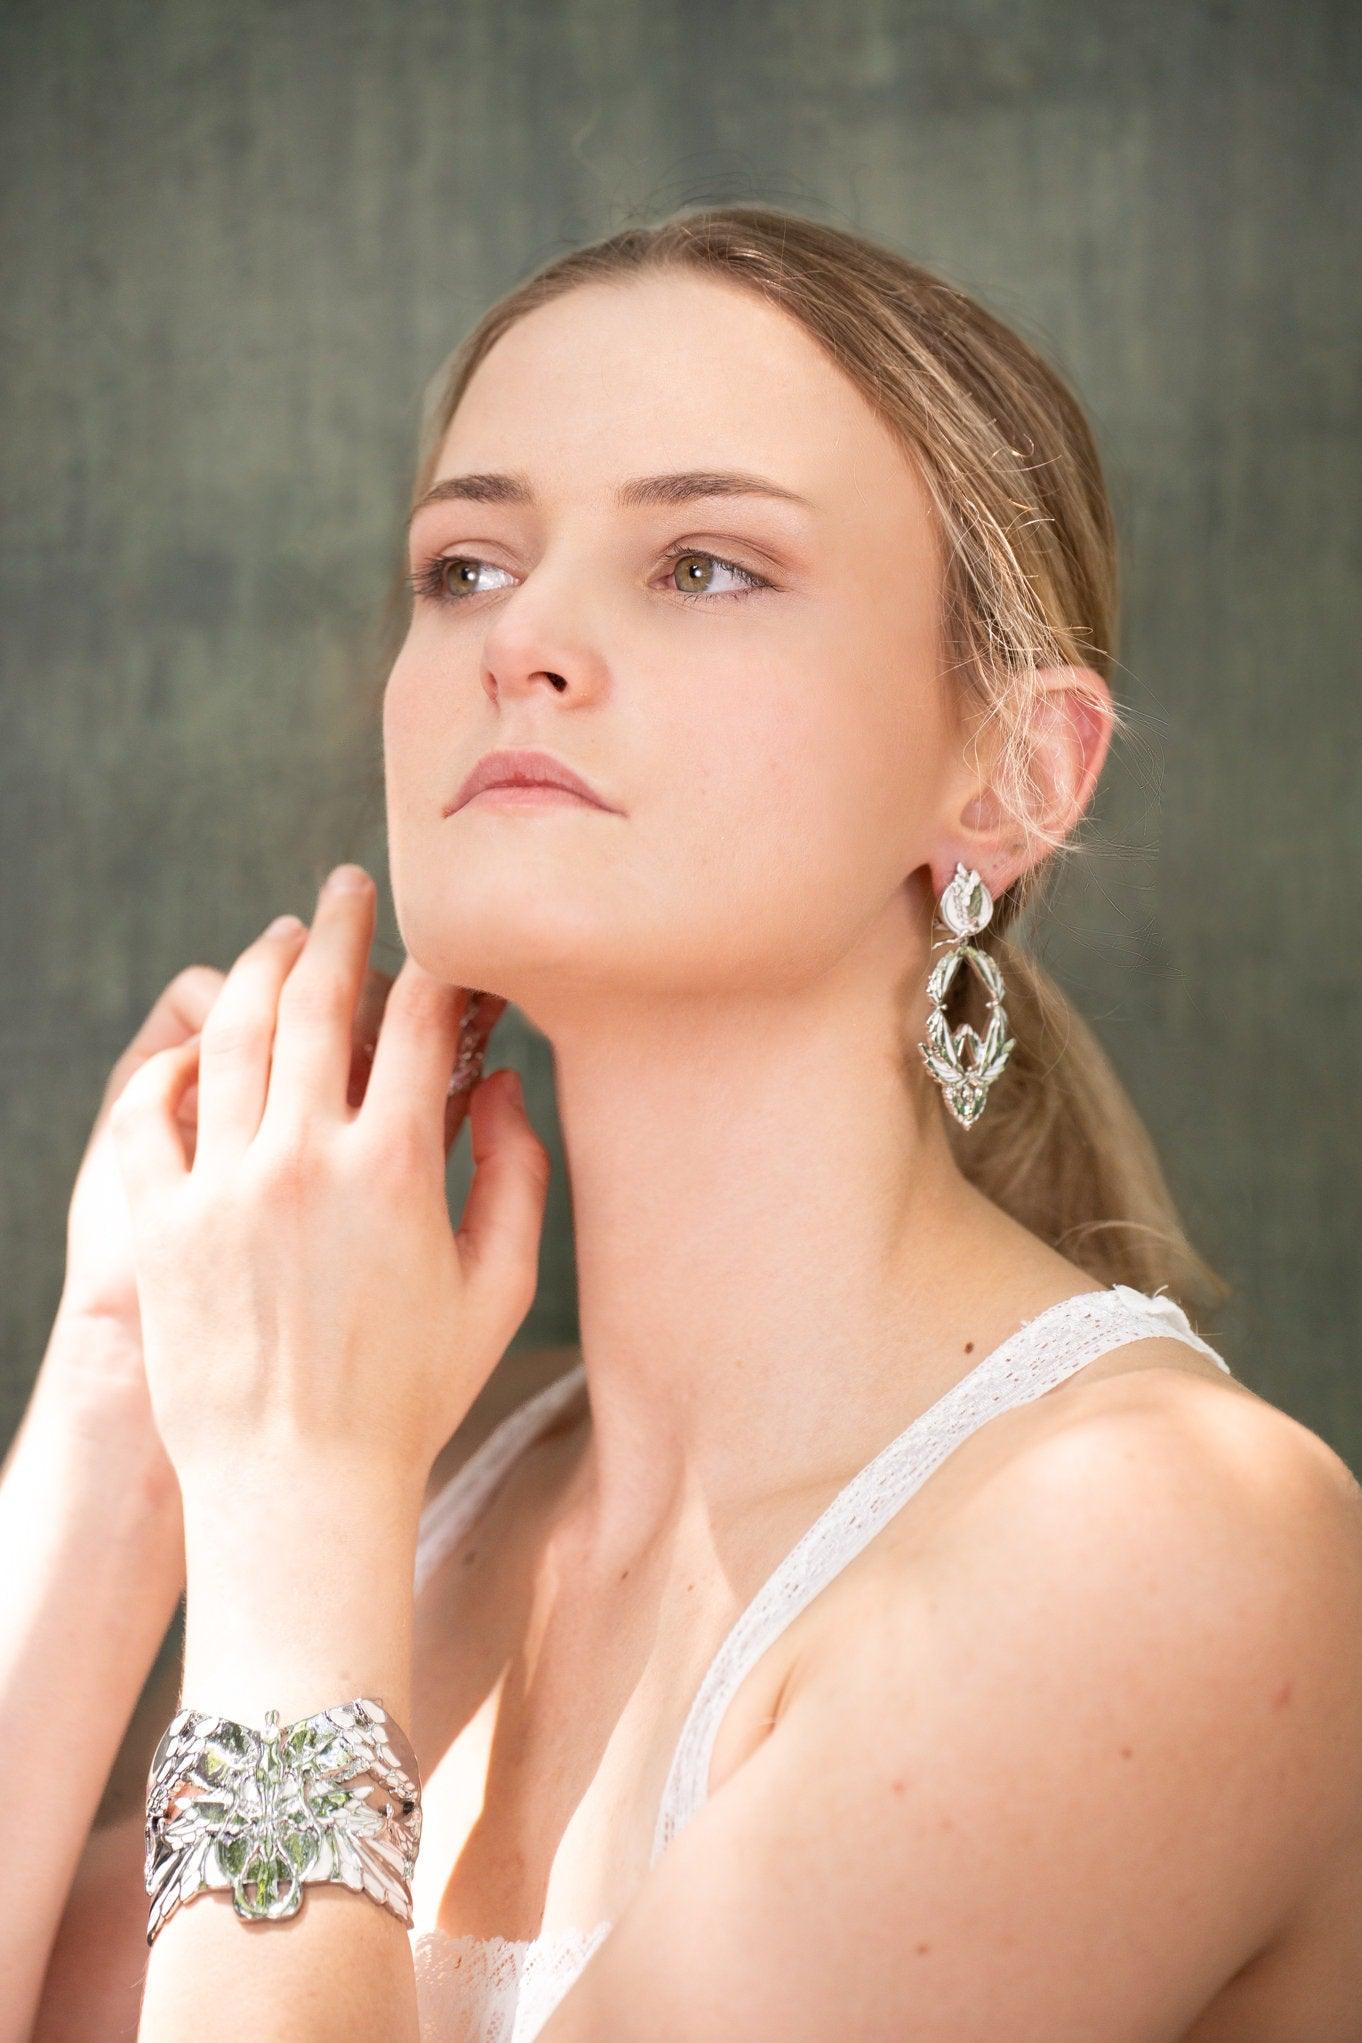 Unique Earrings "Soaring" - Rhodium & Bright White, Large Jewelry, Gift, Gift for Mom, Artistic